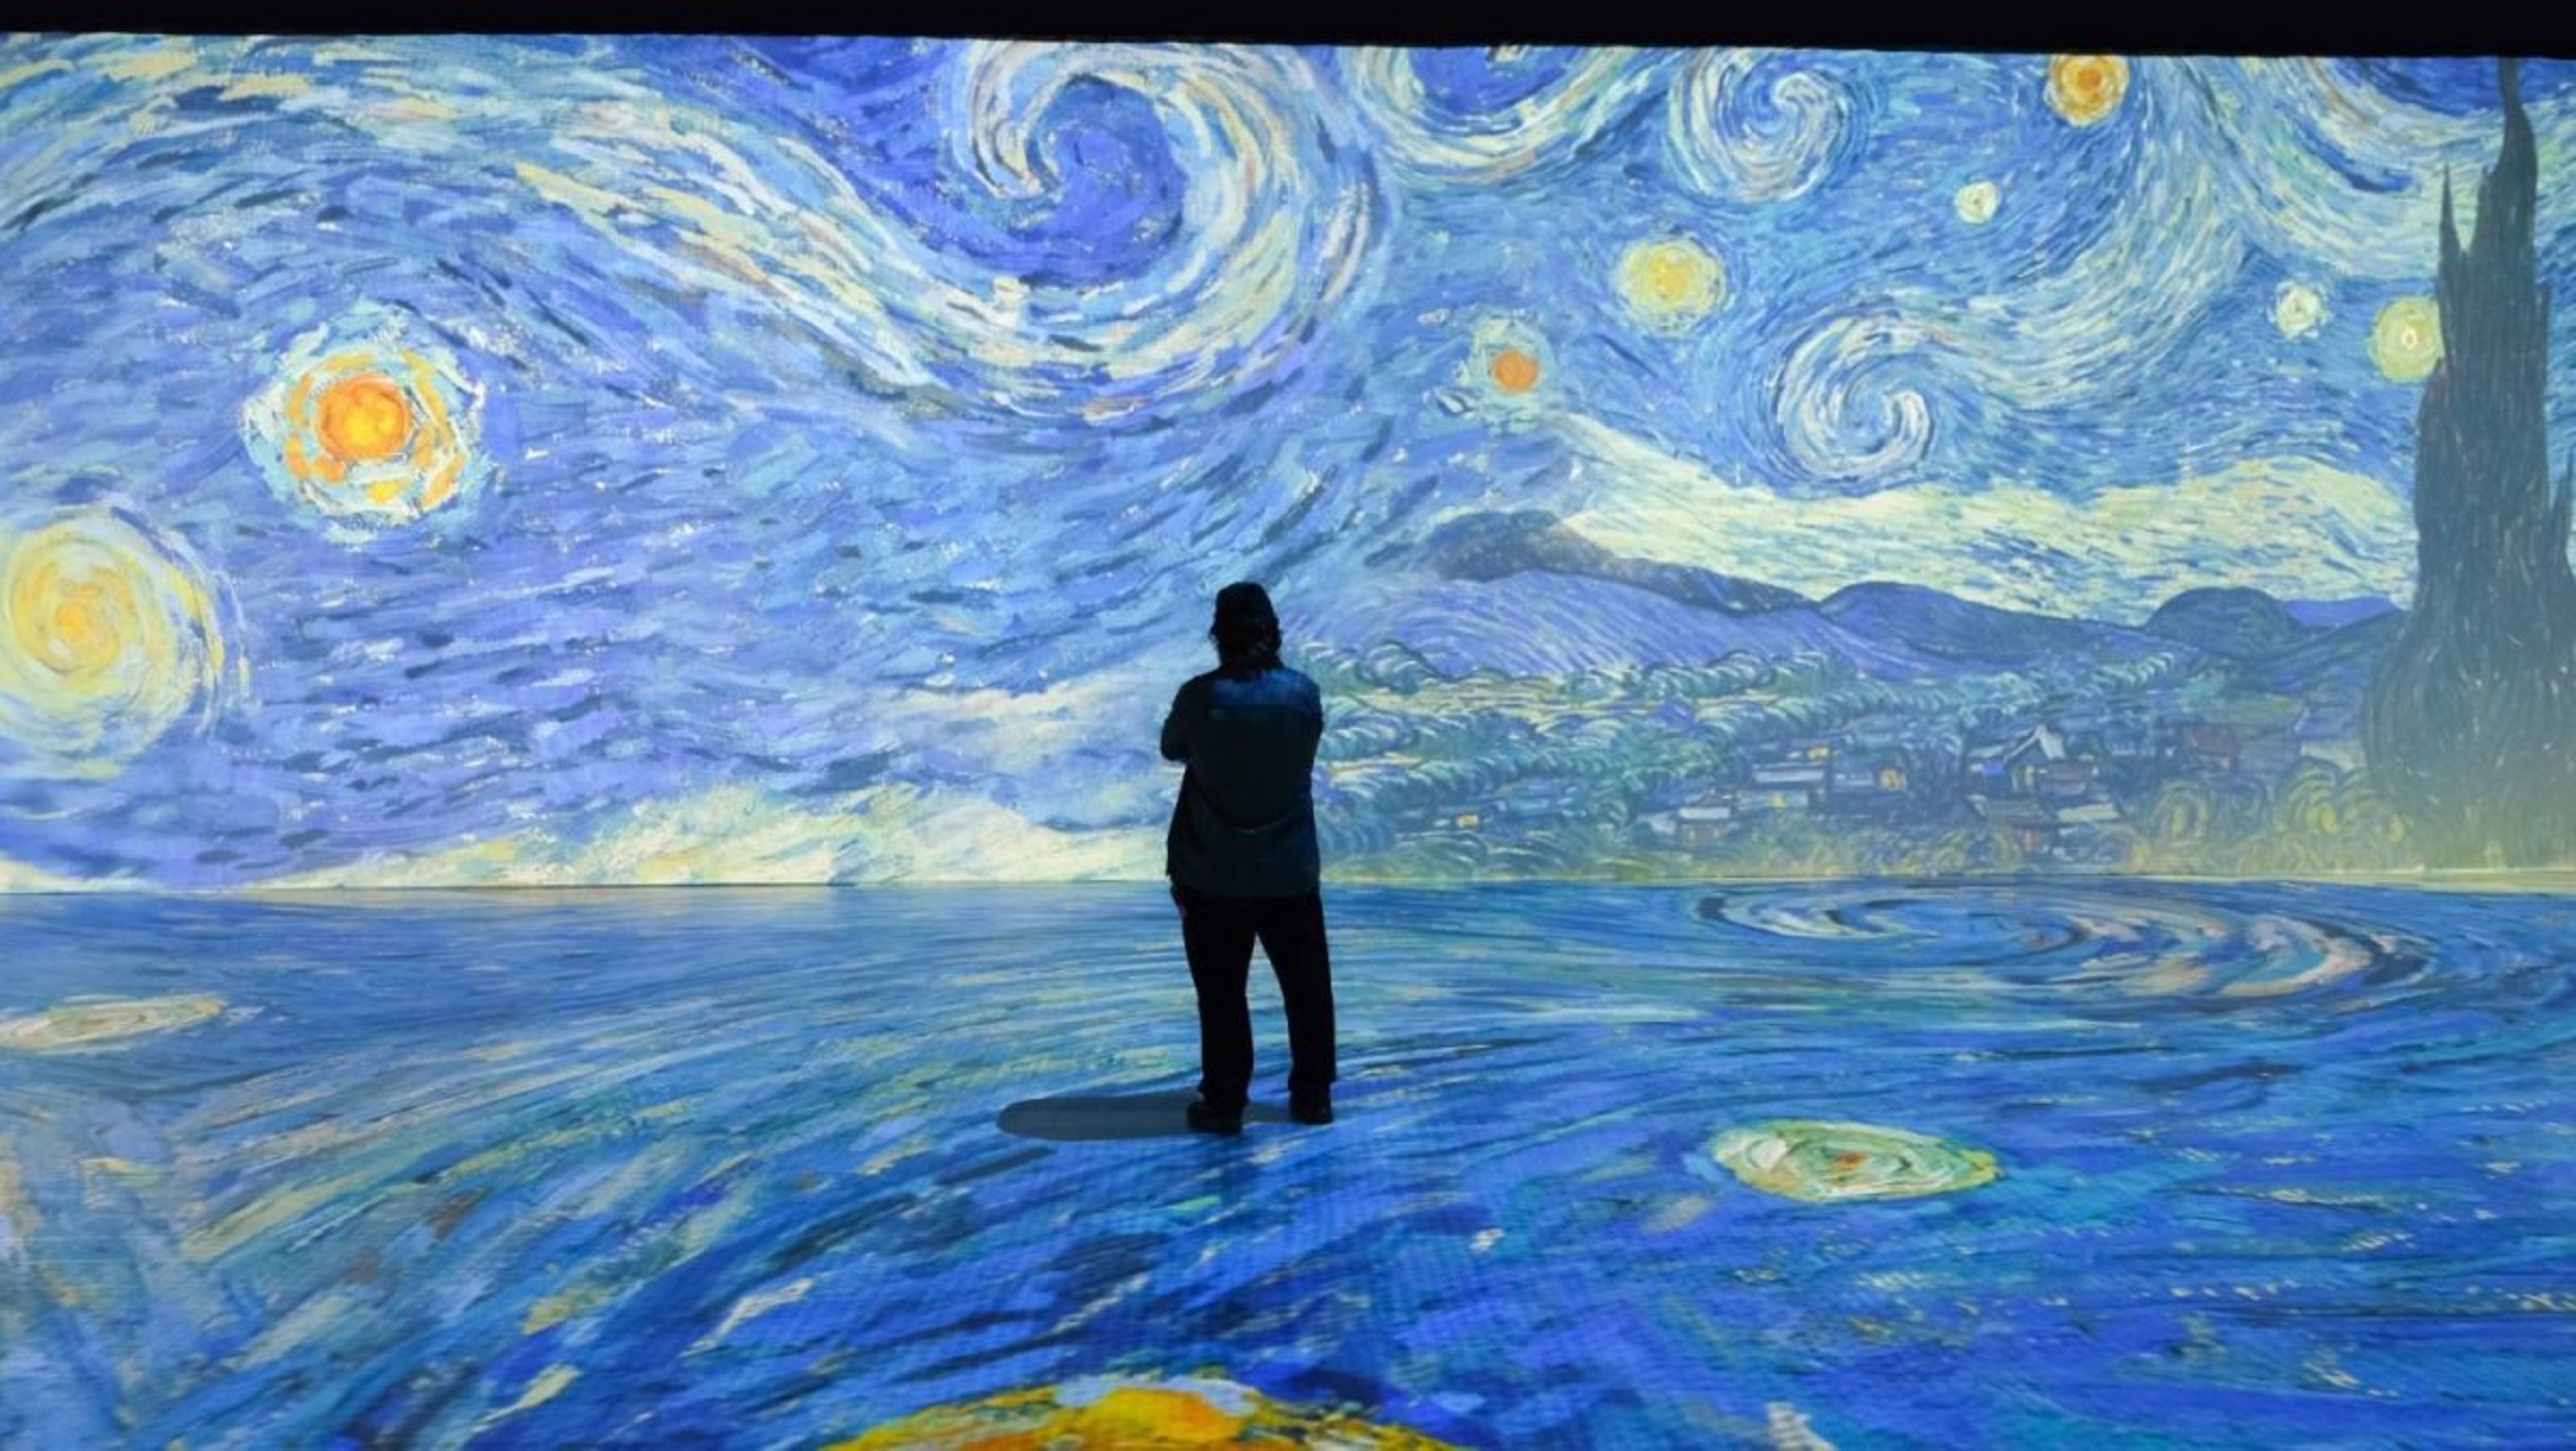 A visitor views Van Gogh's Starry Night projected on a wall and the floor in the immersive Van Gogh Exhibition, Beyond Van Gogh